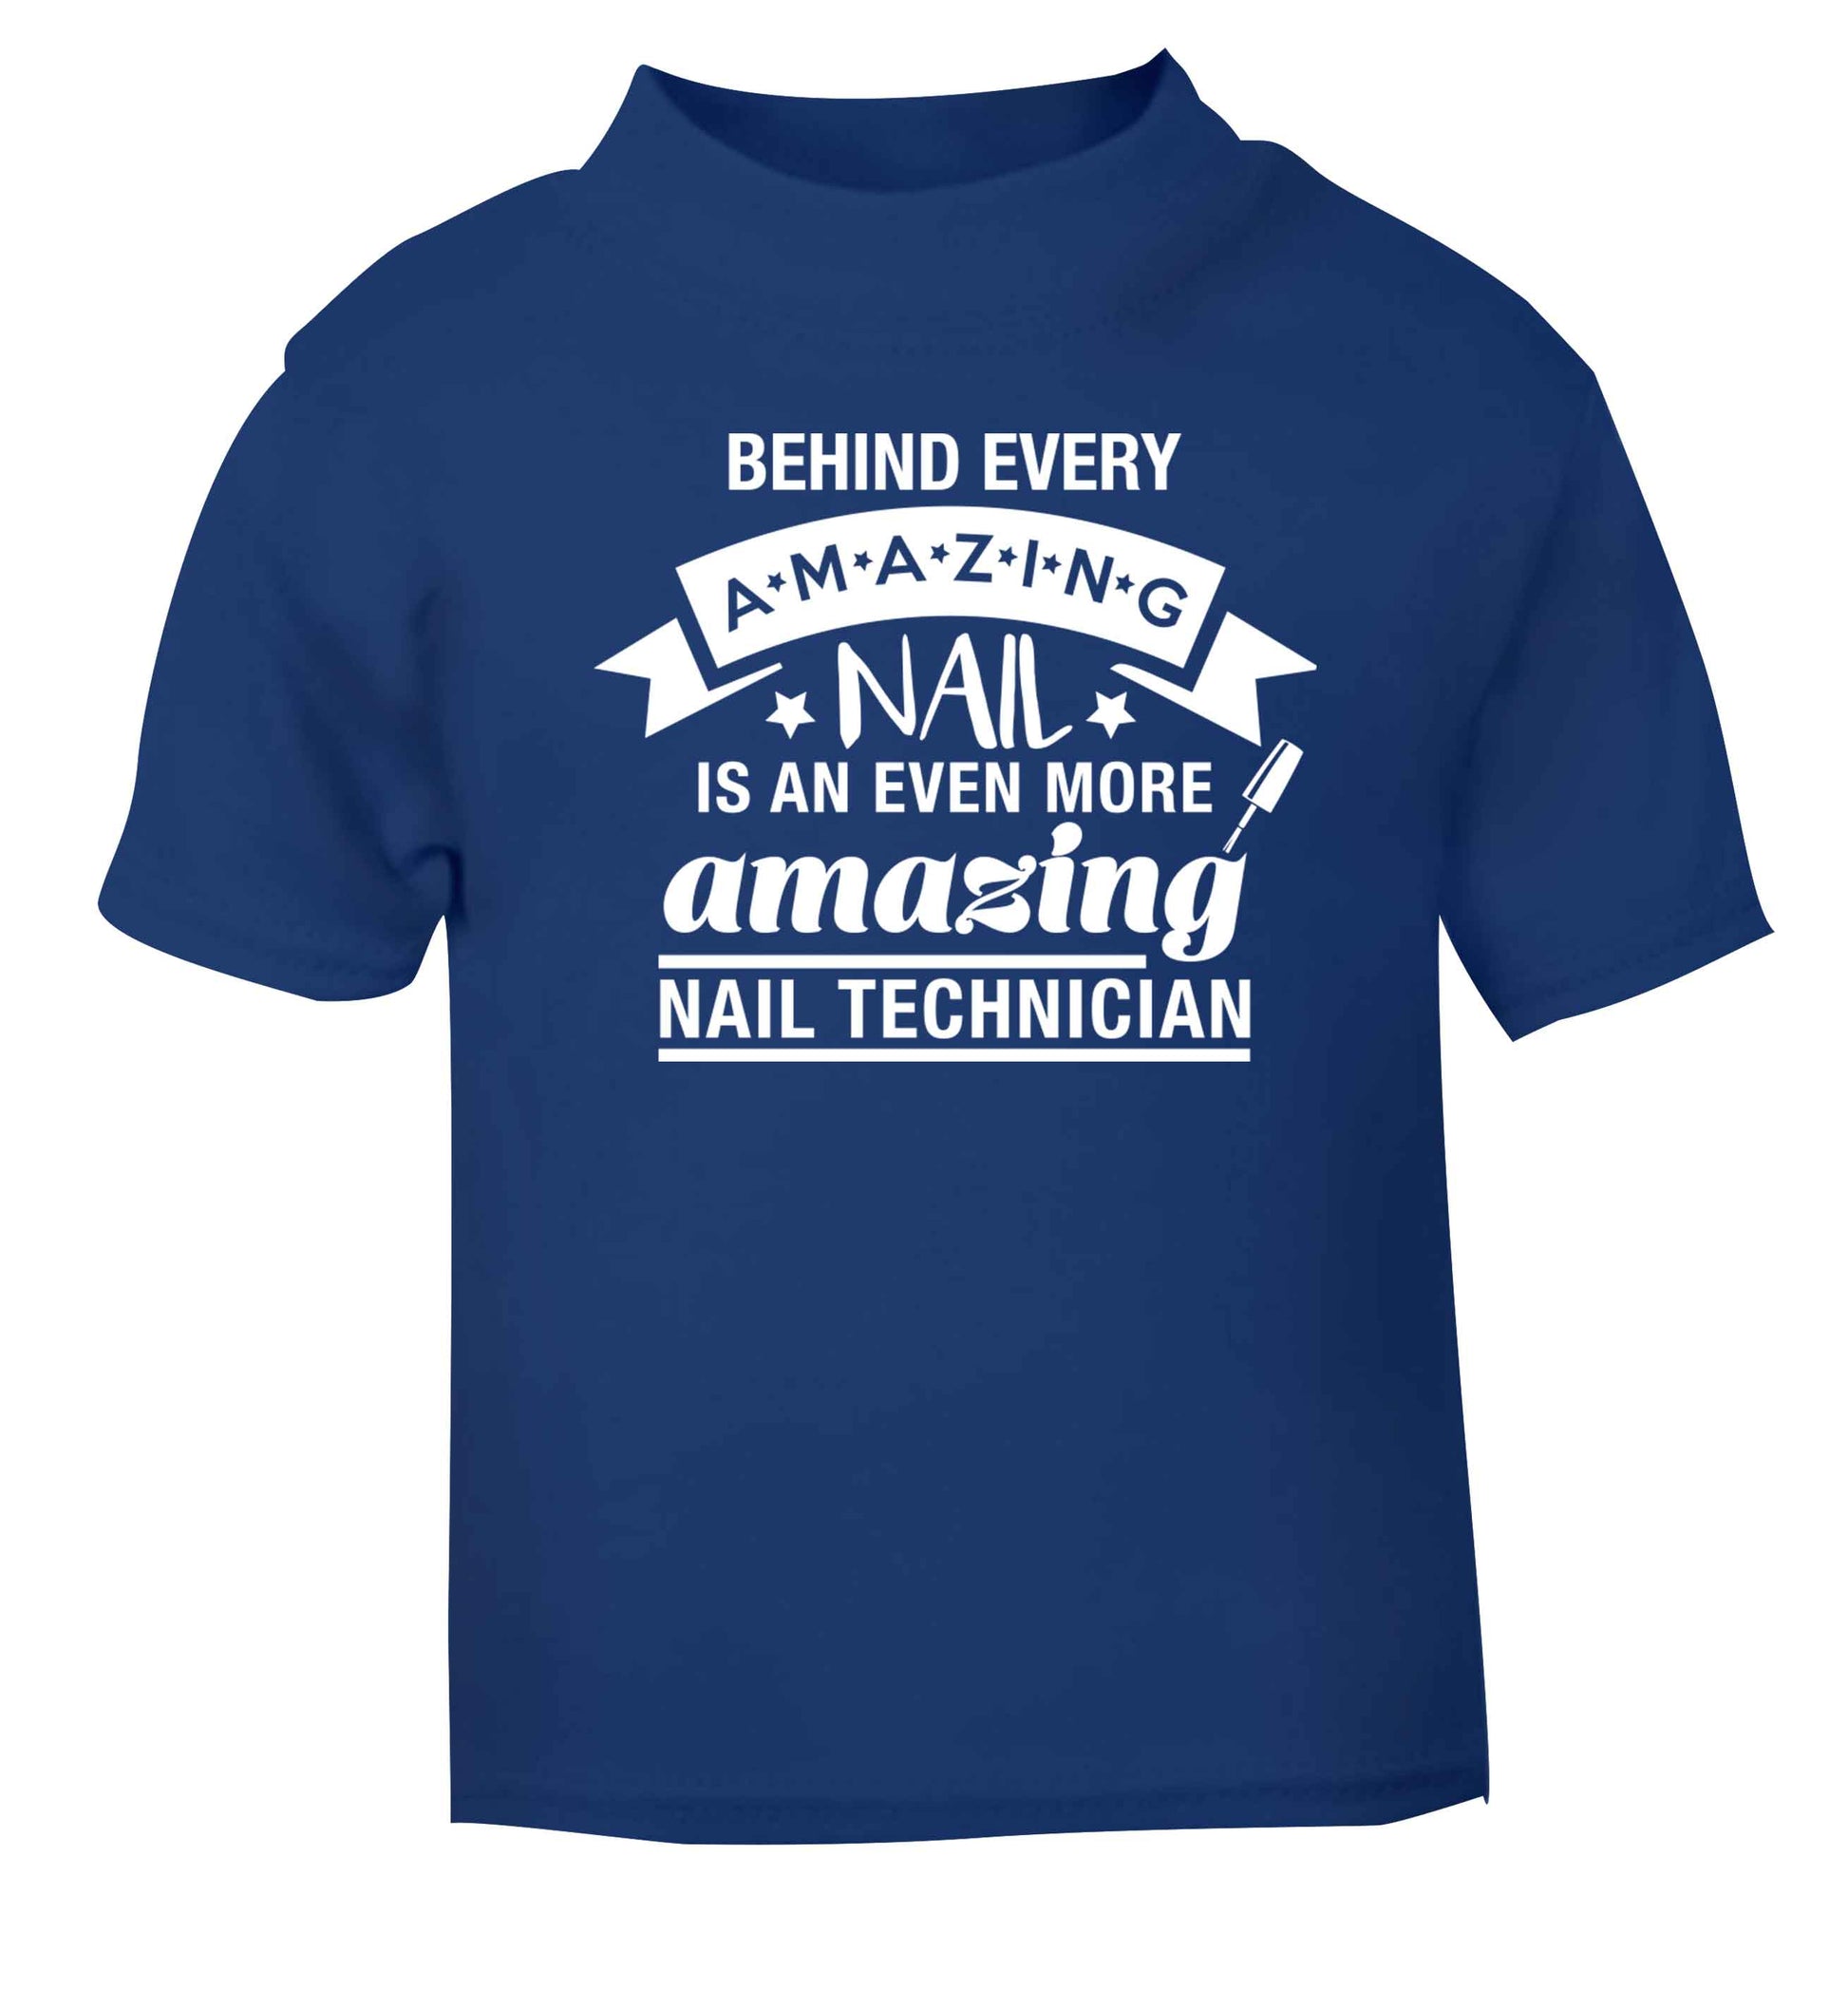 Behind every amazing nail is an even more amazing nail technician blue baby toddler Tshirt 2 Years